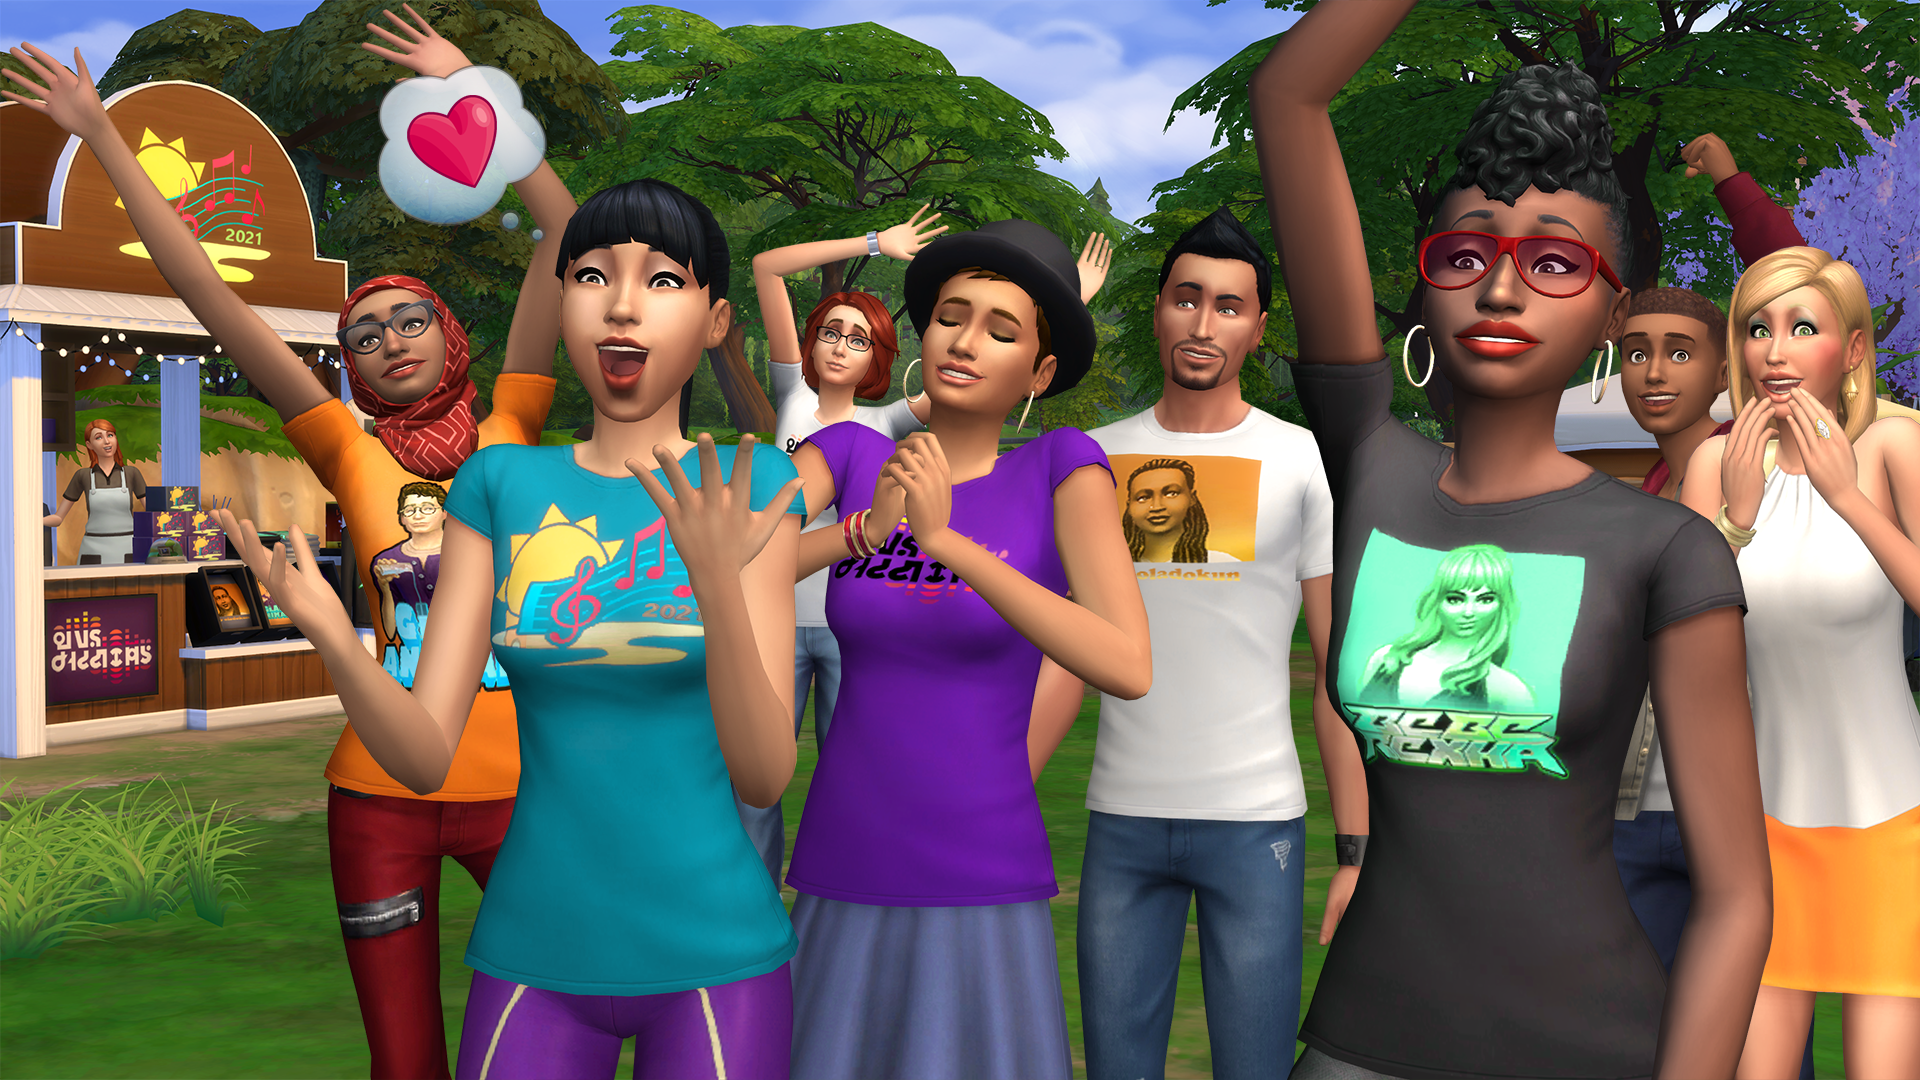 A group of Sims in The Sims 4 enjoy an outdoor music festival, with the focus on the excited crowd and vendors in the background.